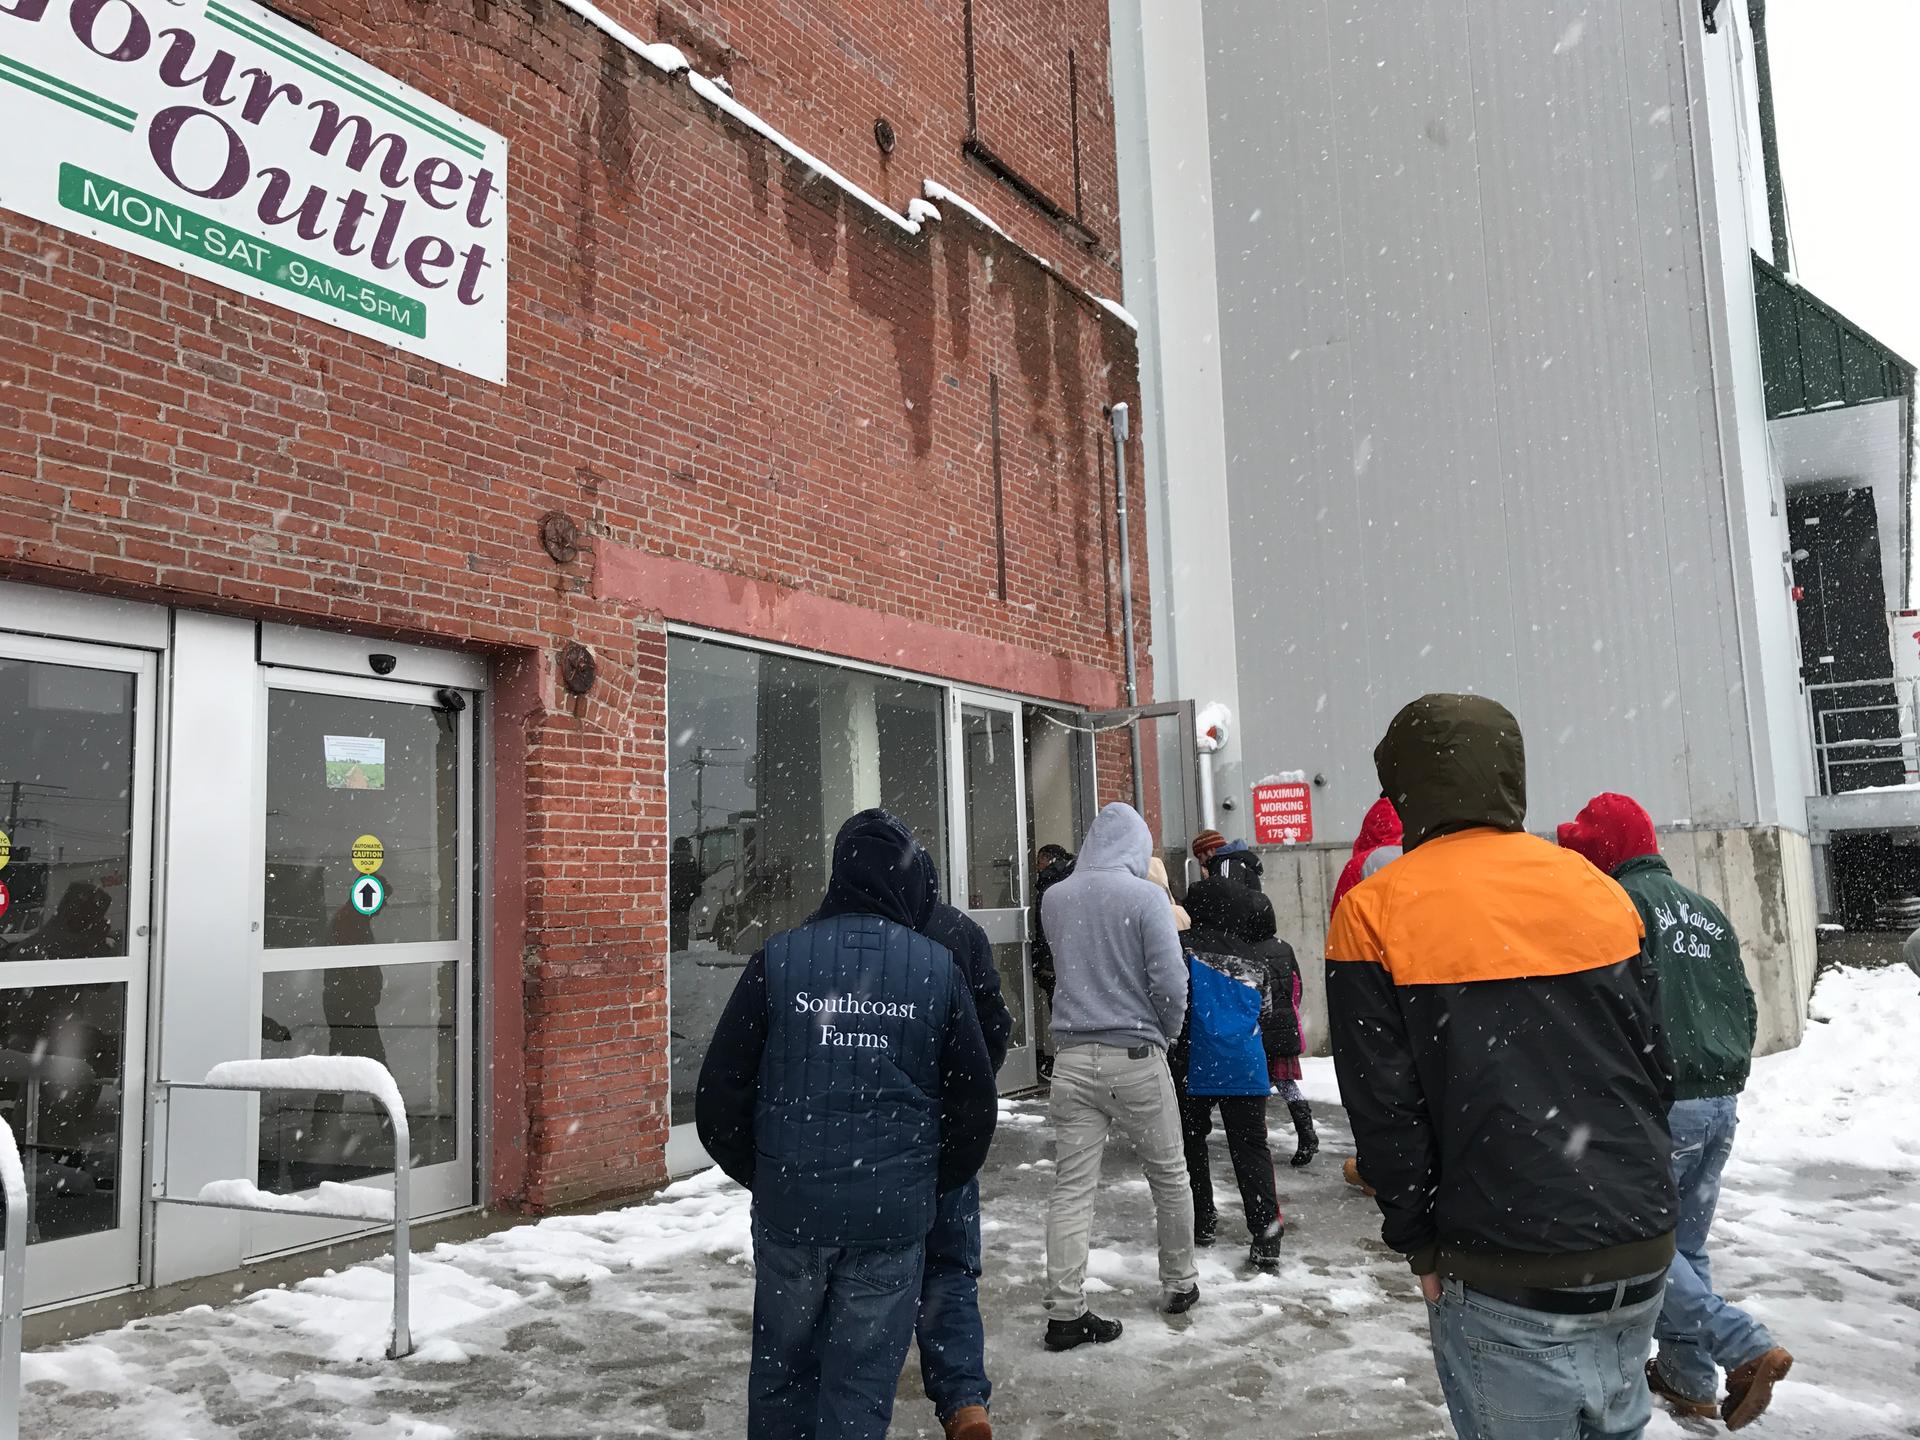 Workers who have been fired gather at the management office for Sid Wainer & Son in New Bedford, Mass. on March 10, 2017. Most of the workers are undocumented, and felt their termination was unfair.